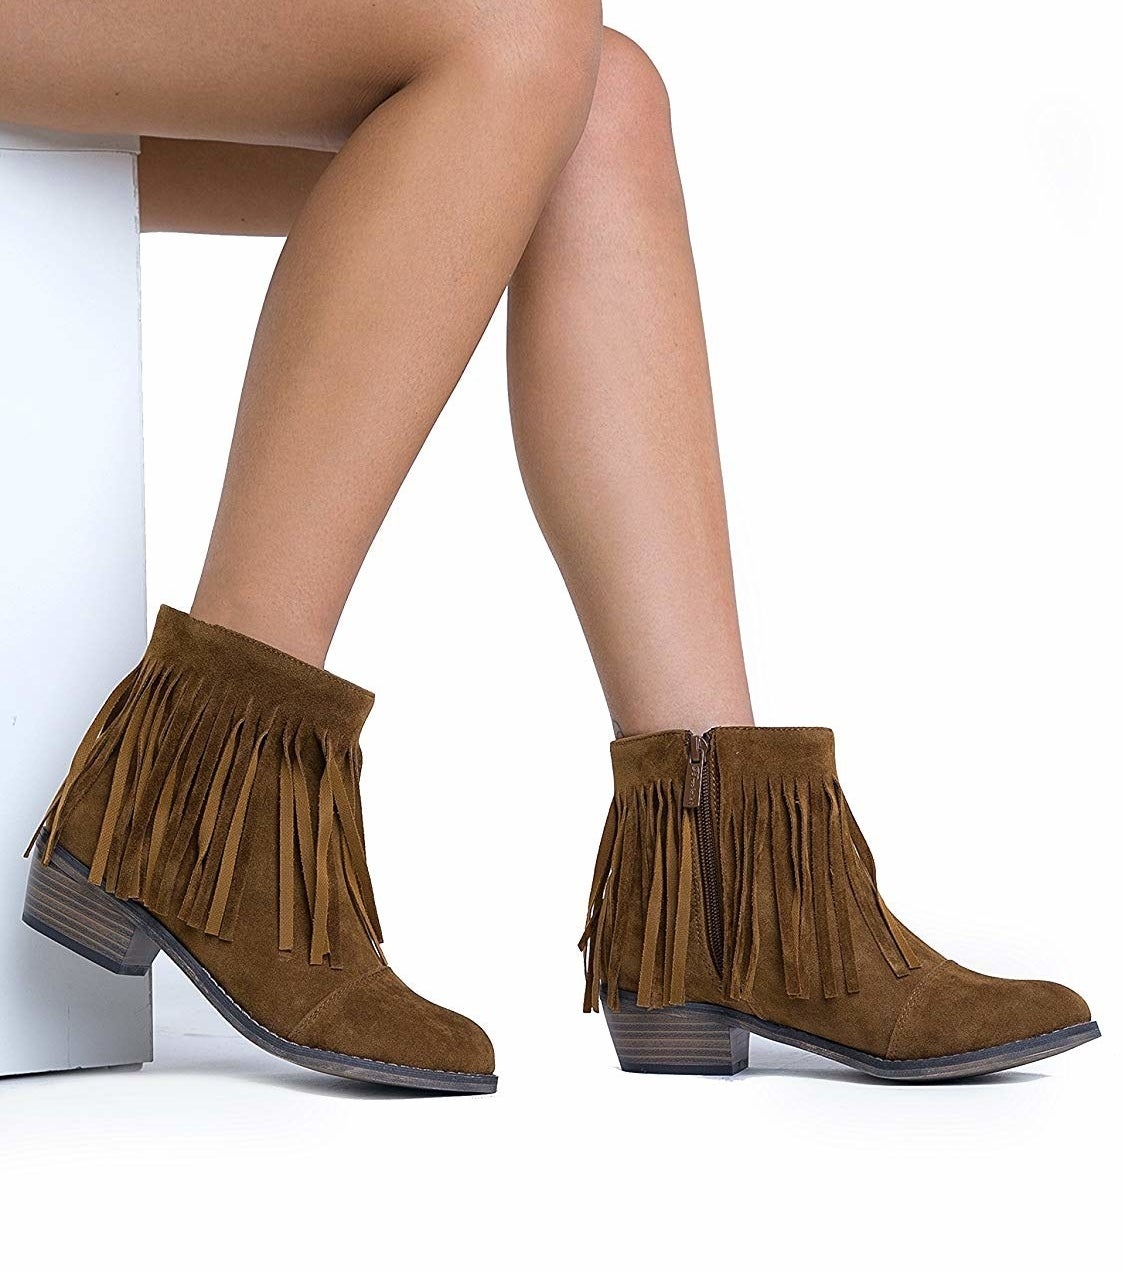 25 Pairs Of Boots That'll Basically Go With Every Outfit You Own